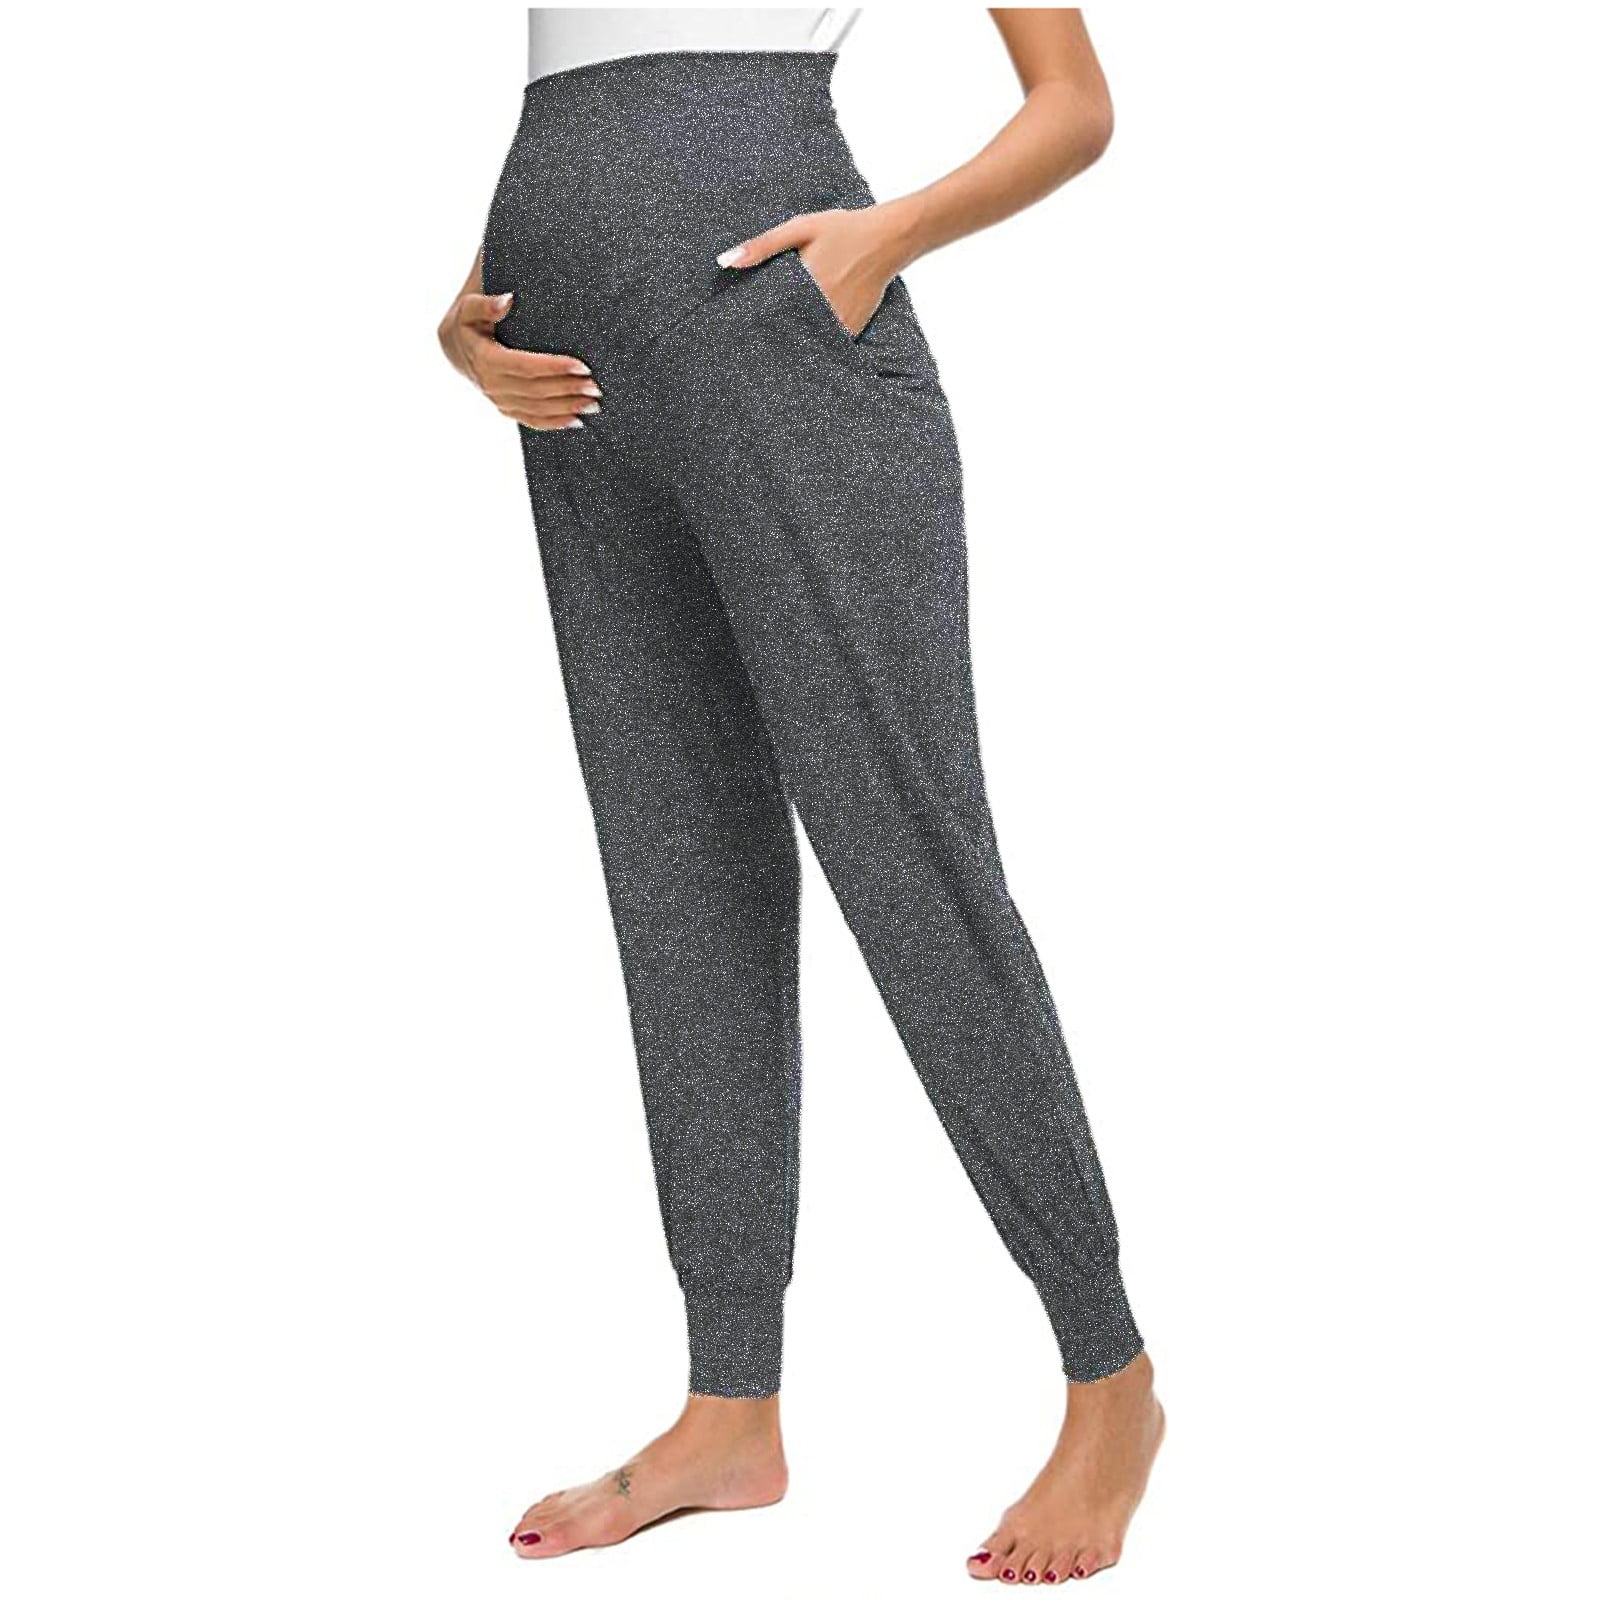 TUOBARR Maternity Clothes Maternity Women's Solid Color Casual Pants  Stretchy Comfortable Lounge Pants